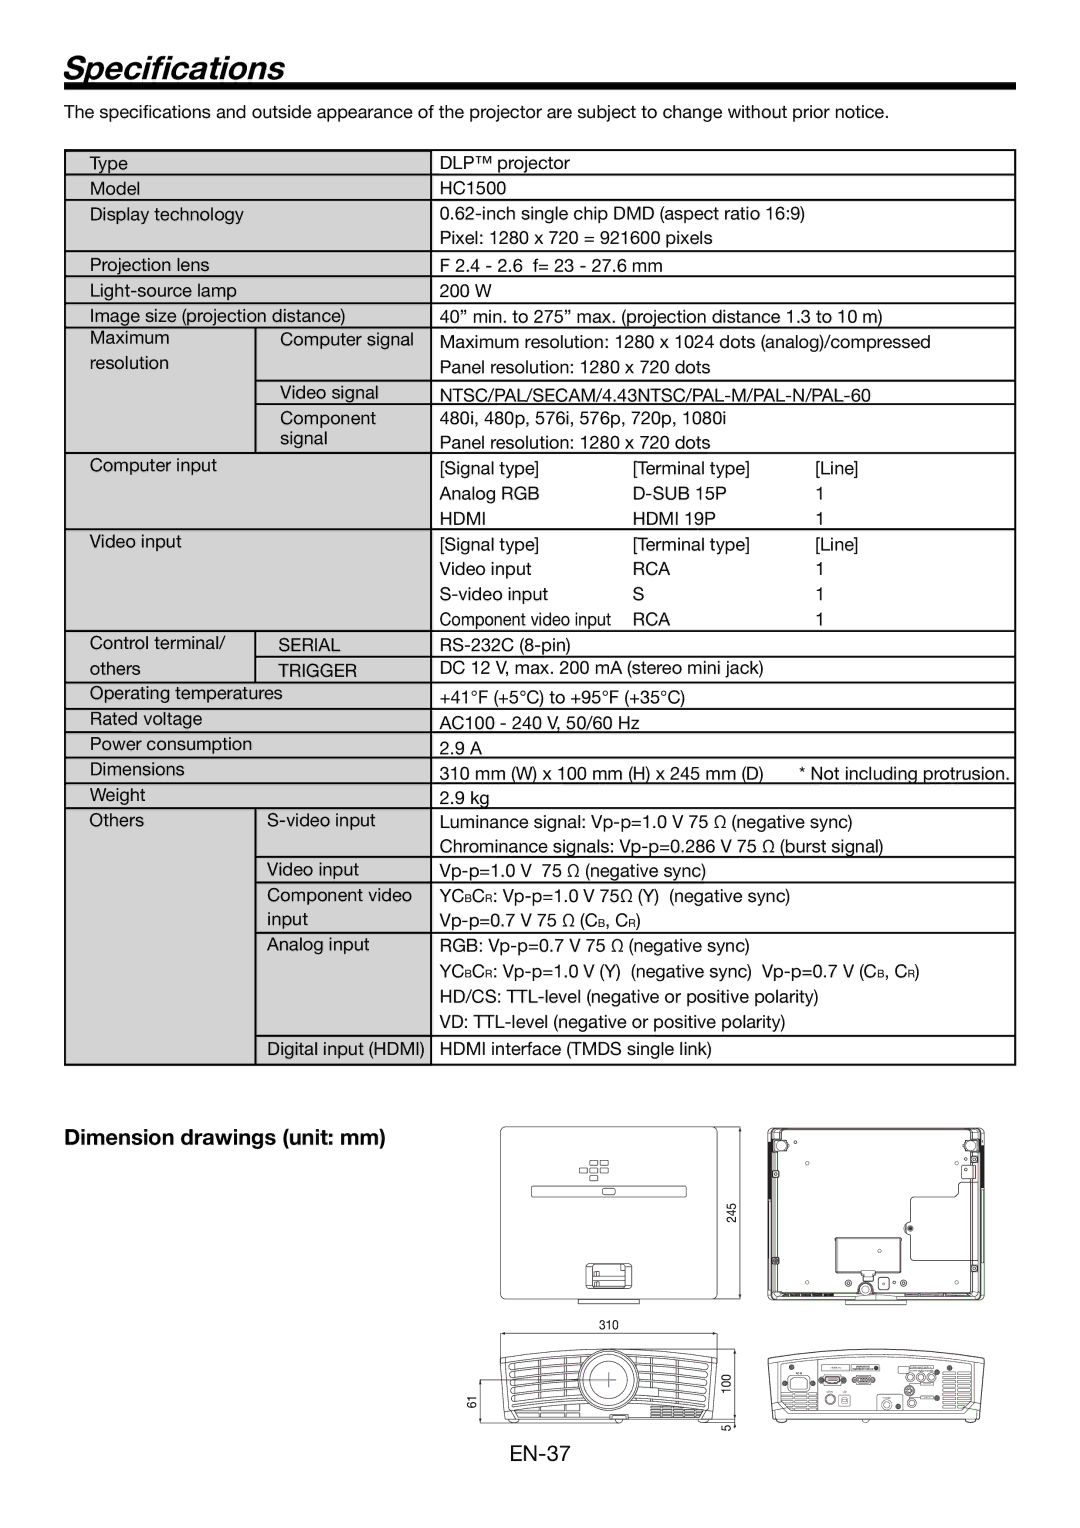 Mitsubishi Electronics HC1500 user manual Speciﬁcations, Dimension drawings unit mm 